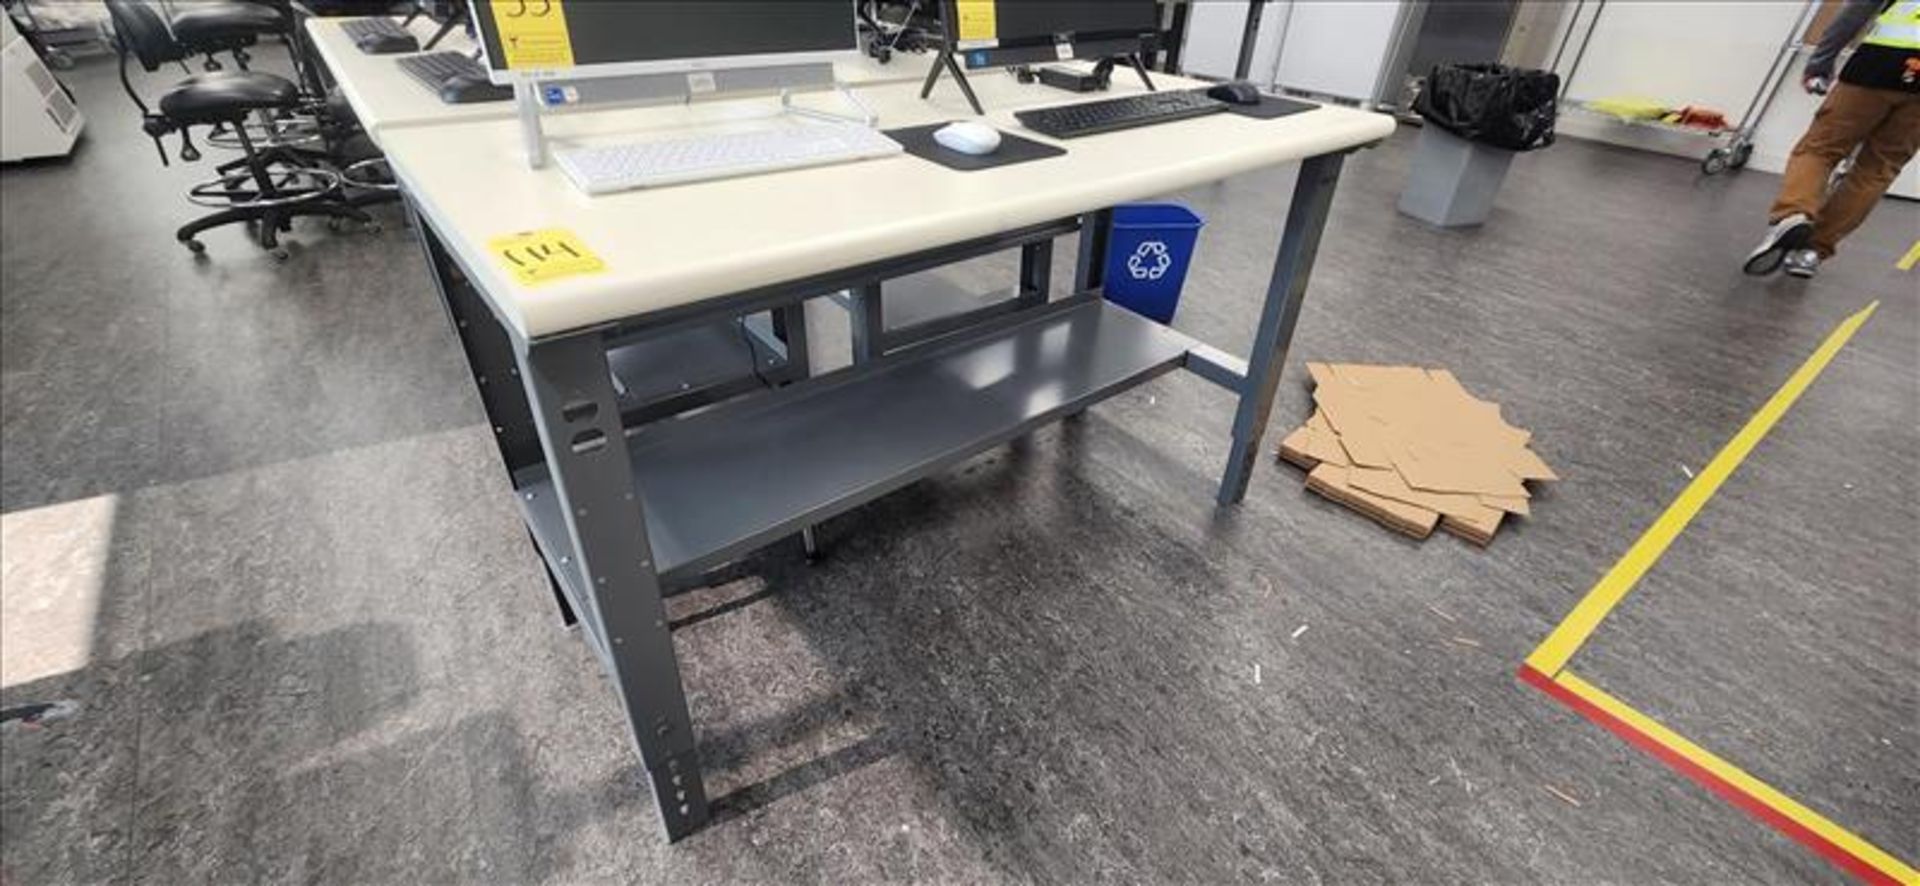 Uline Work Bench approx. 30 in. x 60 in.